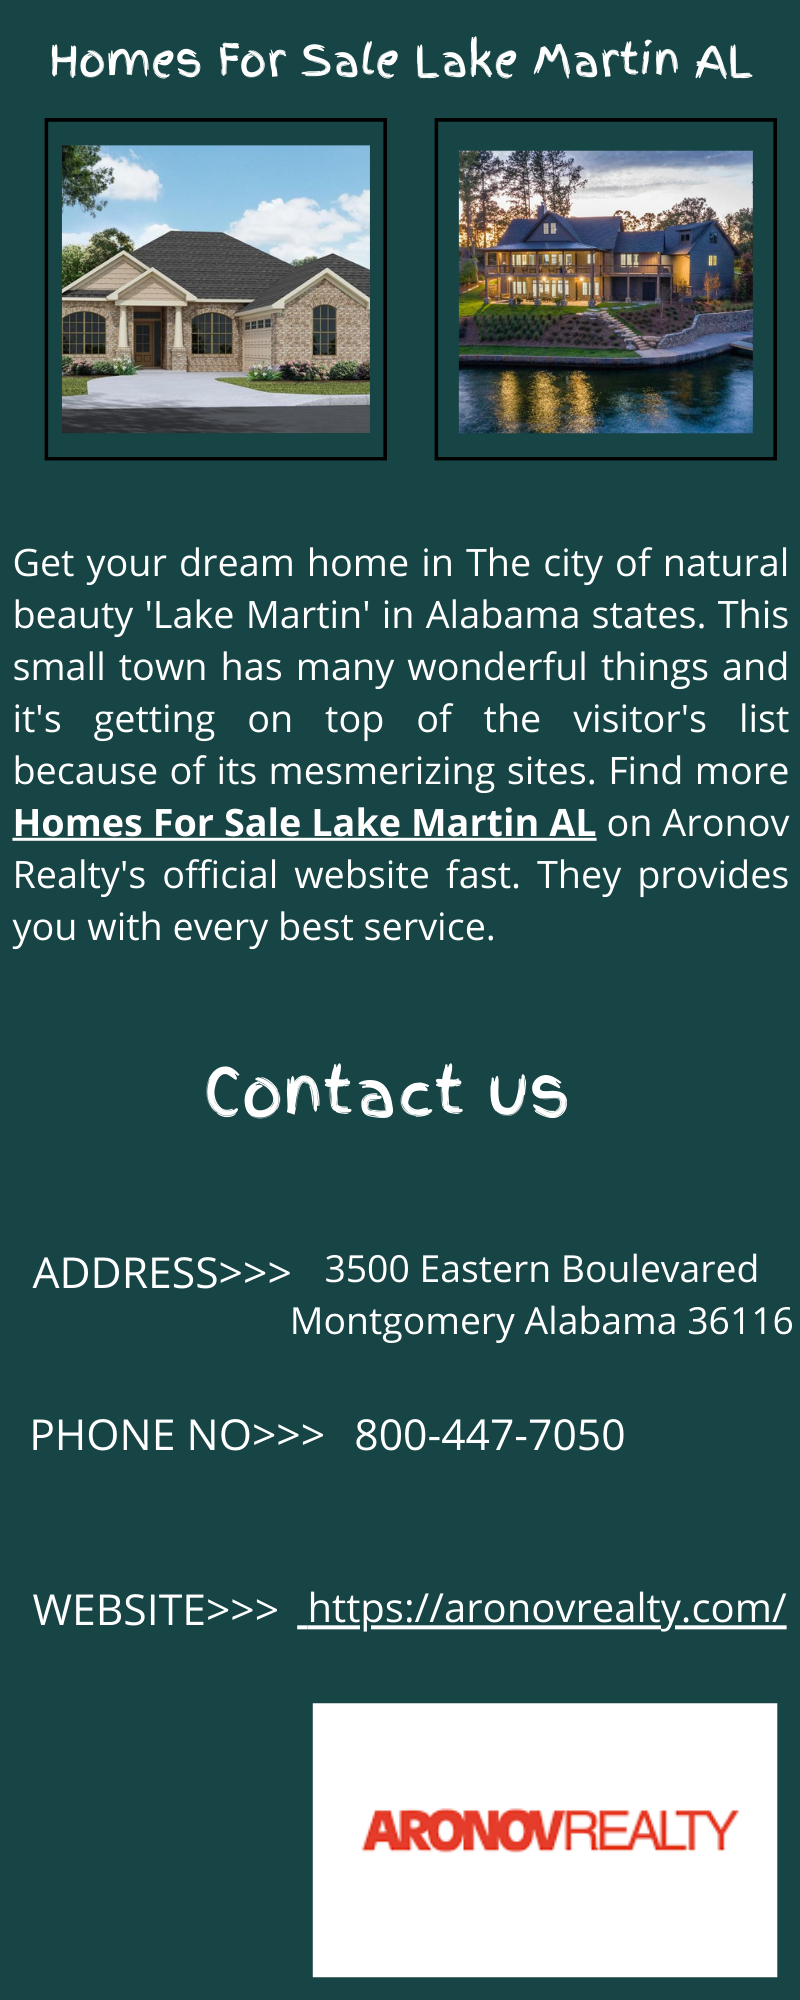 Get Your Homes For Sale Lake Martin AL